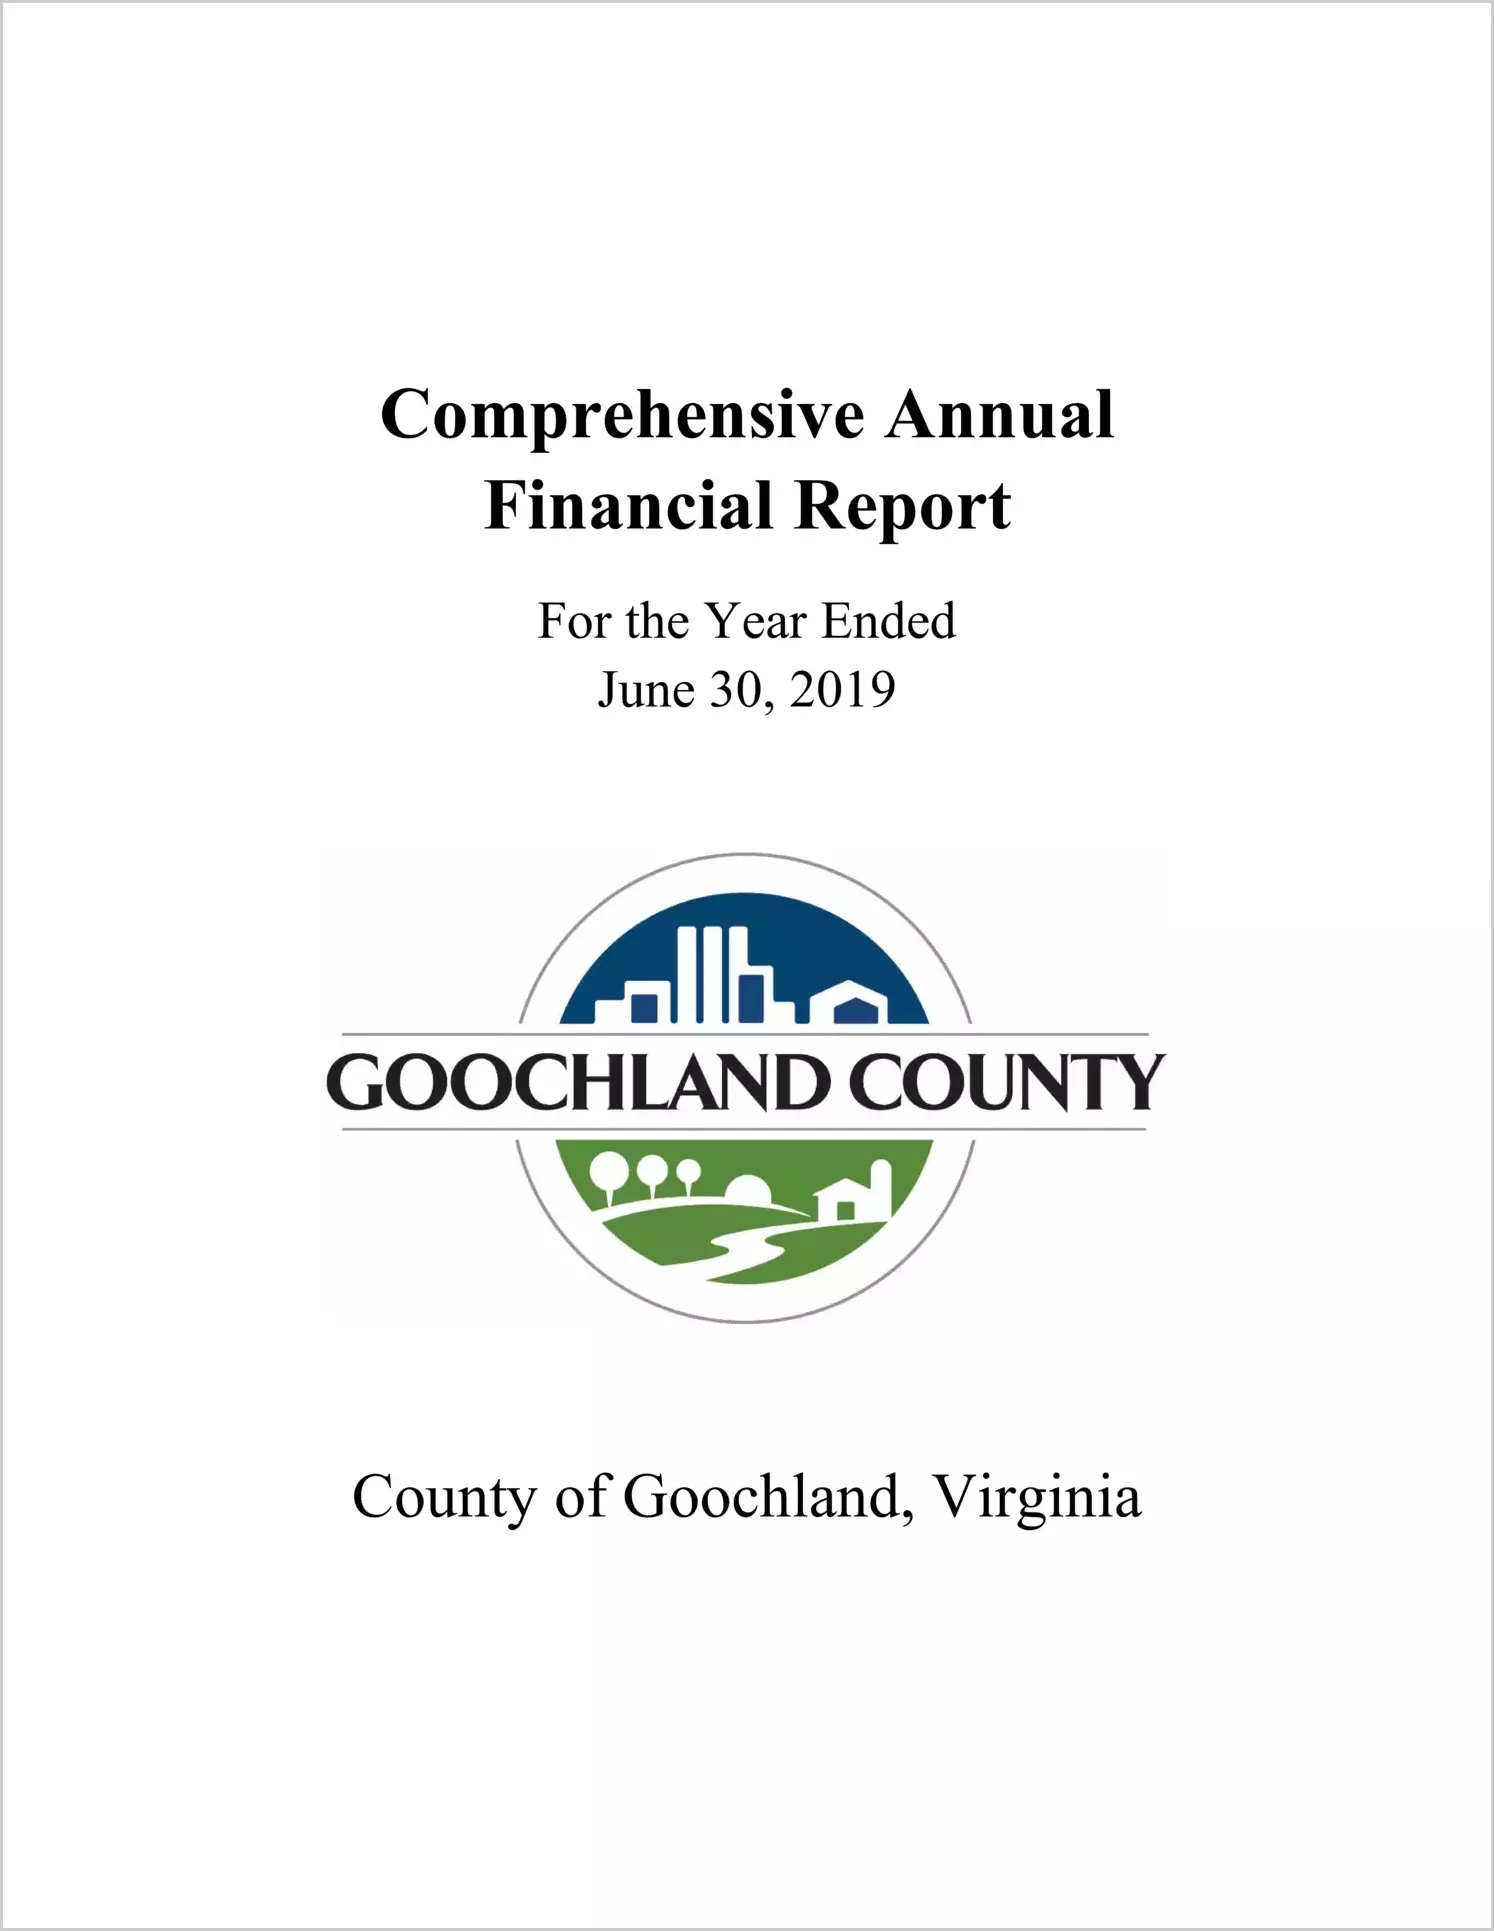 2019 Annual Financial Report for County of Goochland